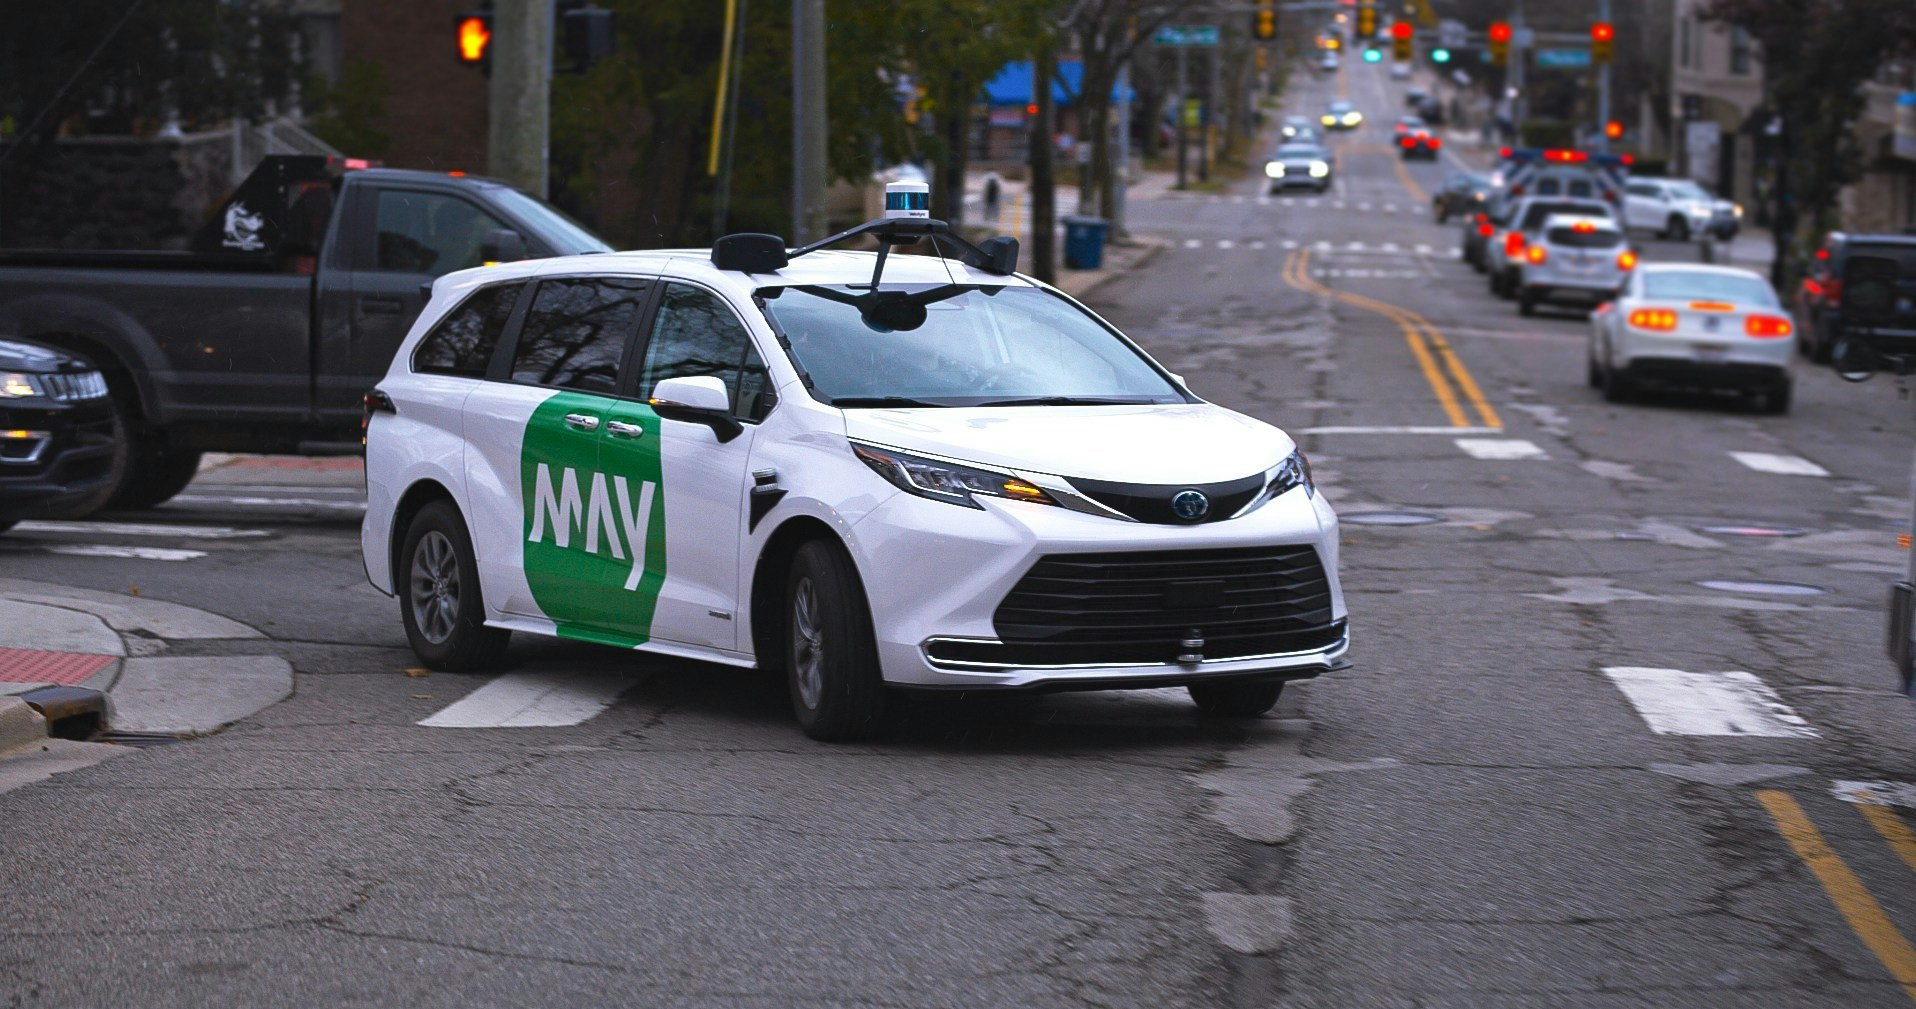 May Mobility uses a Toyota Sienna minivan that carries 8 passengers for its autonomous shuttles.